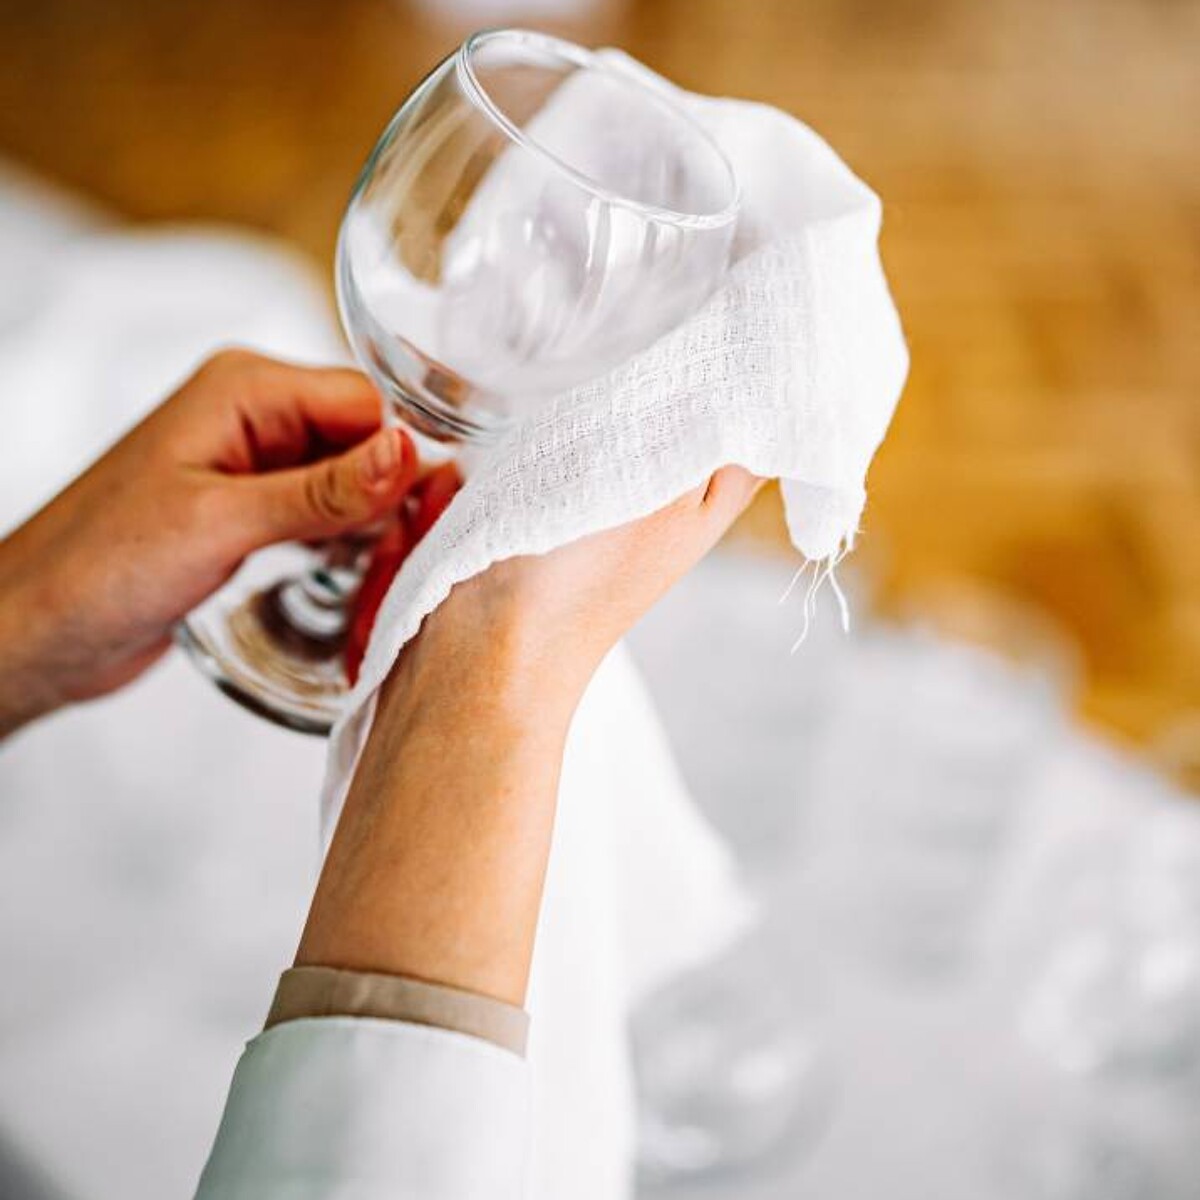 How to Clean Wine Glasses